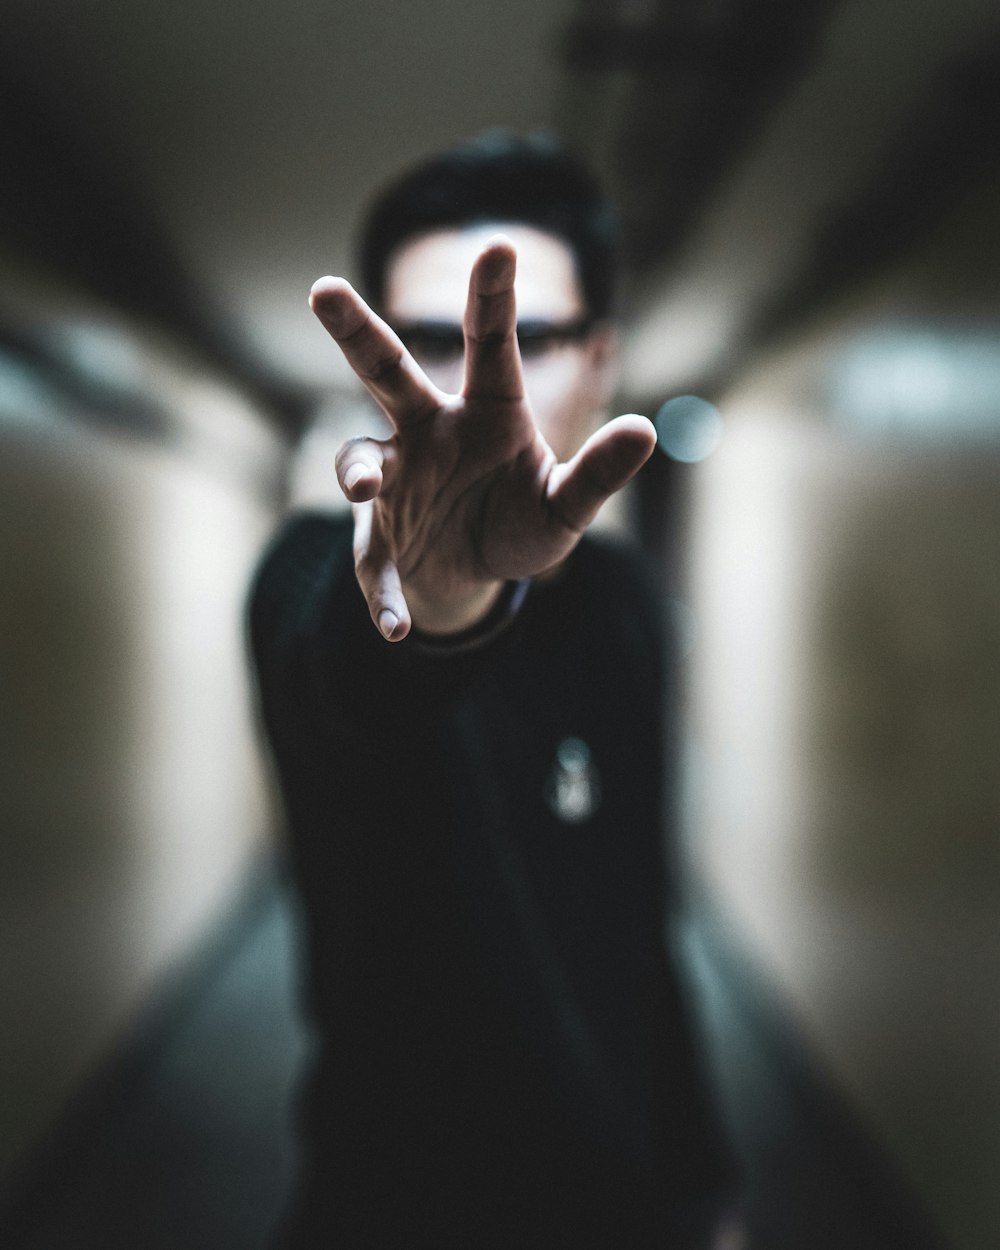 shallow focus photo of person reaching right hand